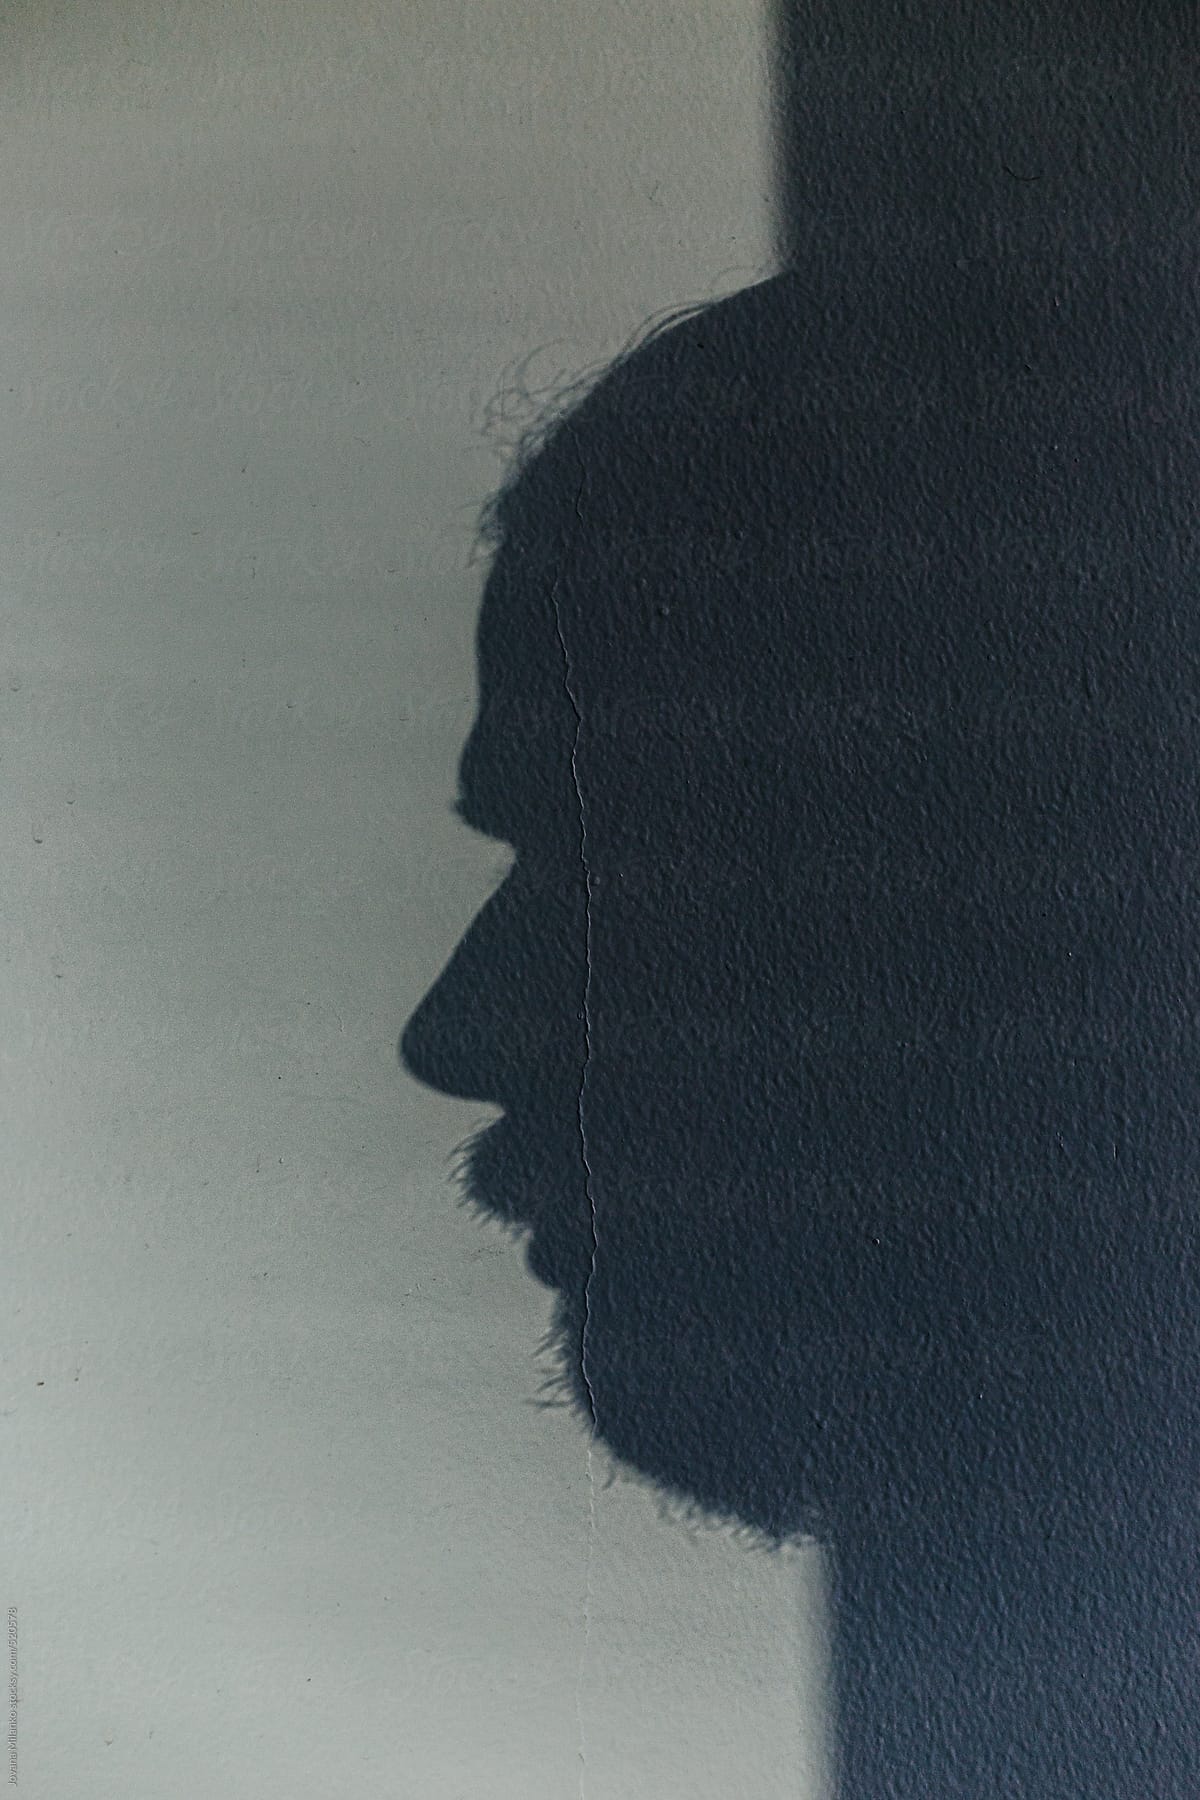 Man's face exiting from the shadow on the wall